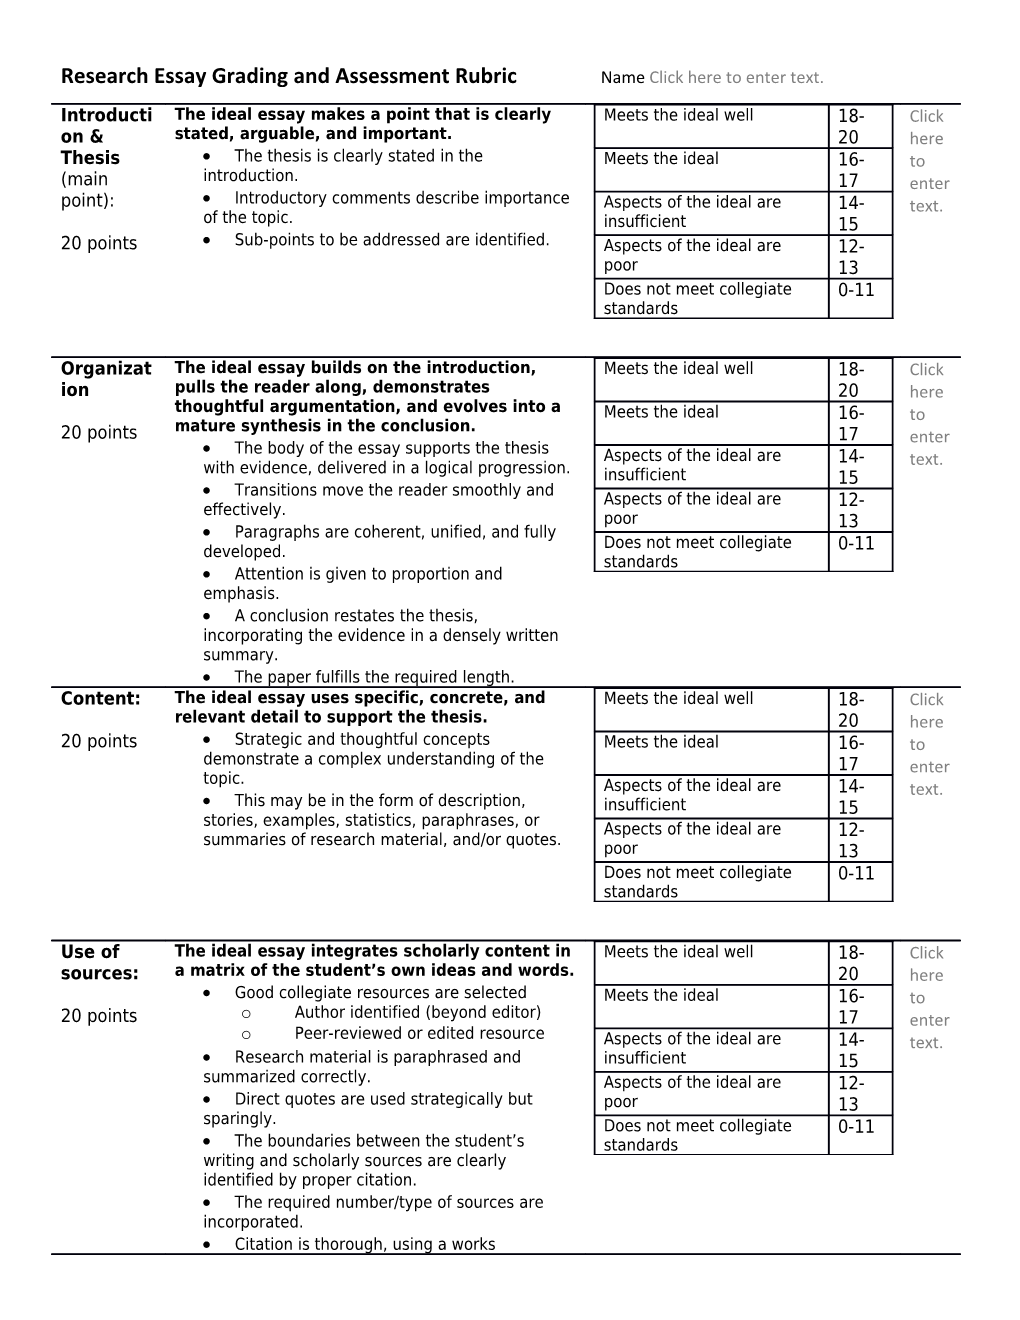 Research Essay Grading and Assessment Rubric Nameclick Here to Enter Text